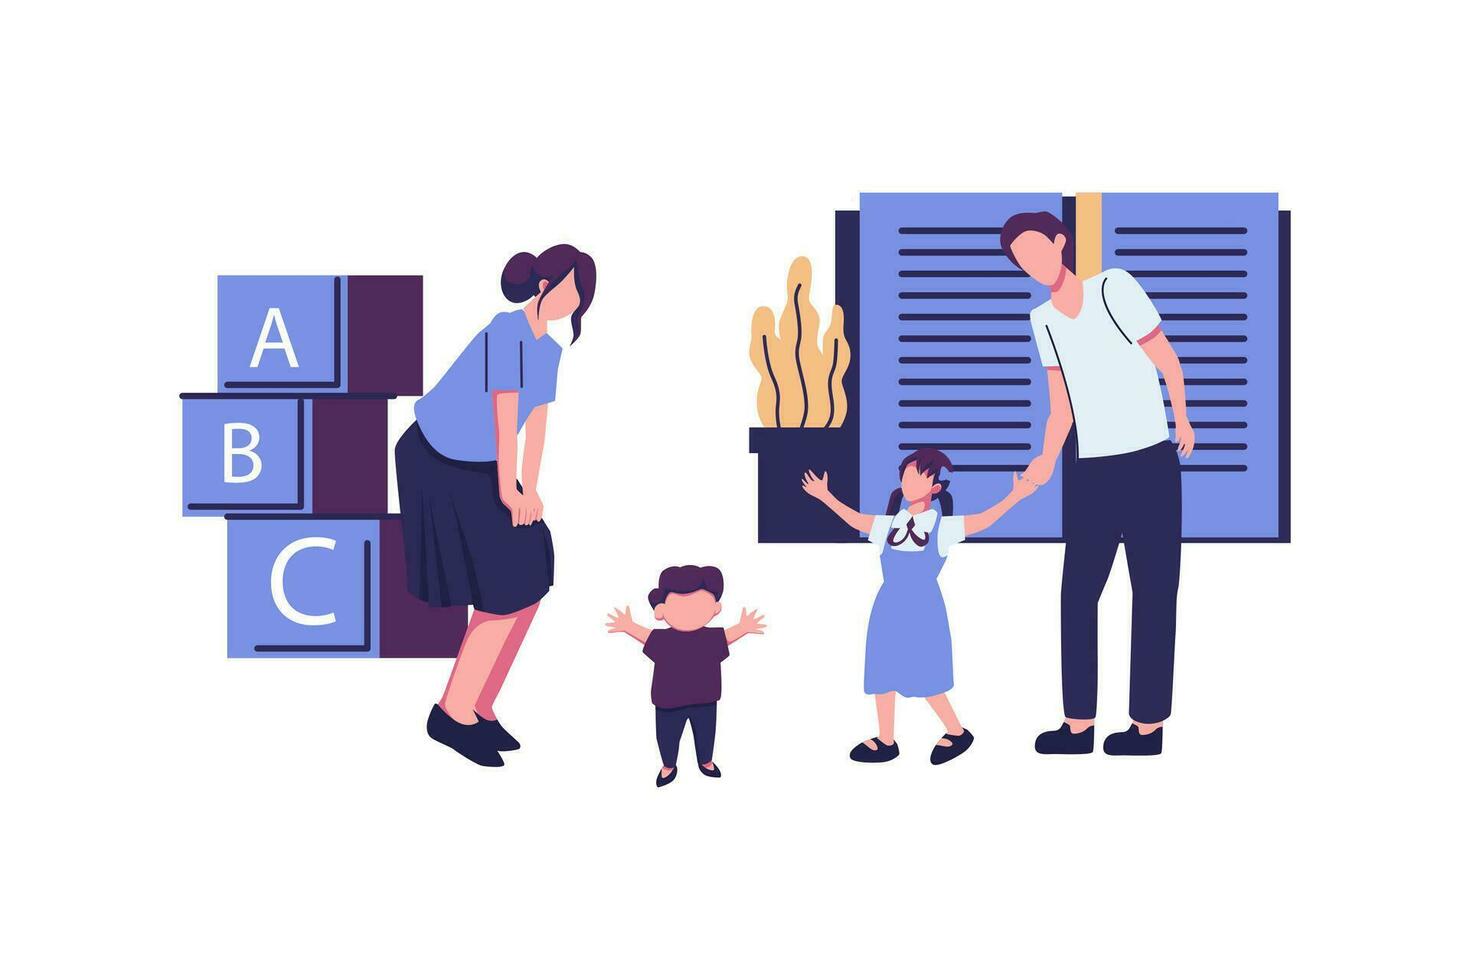 early education vector flat style illustration design